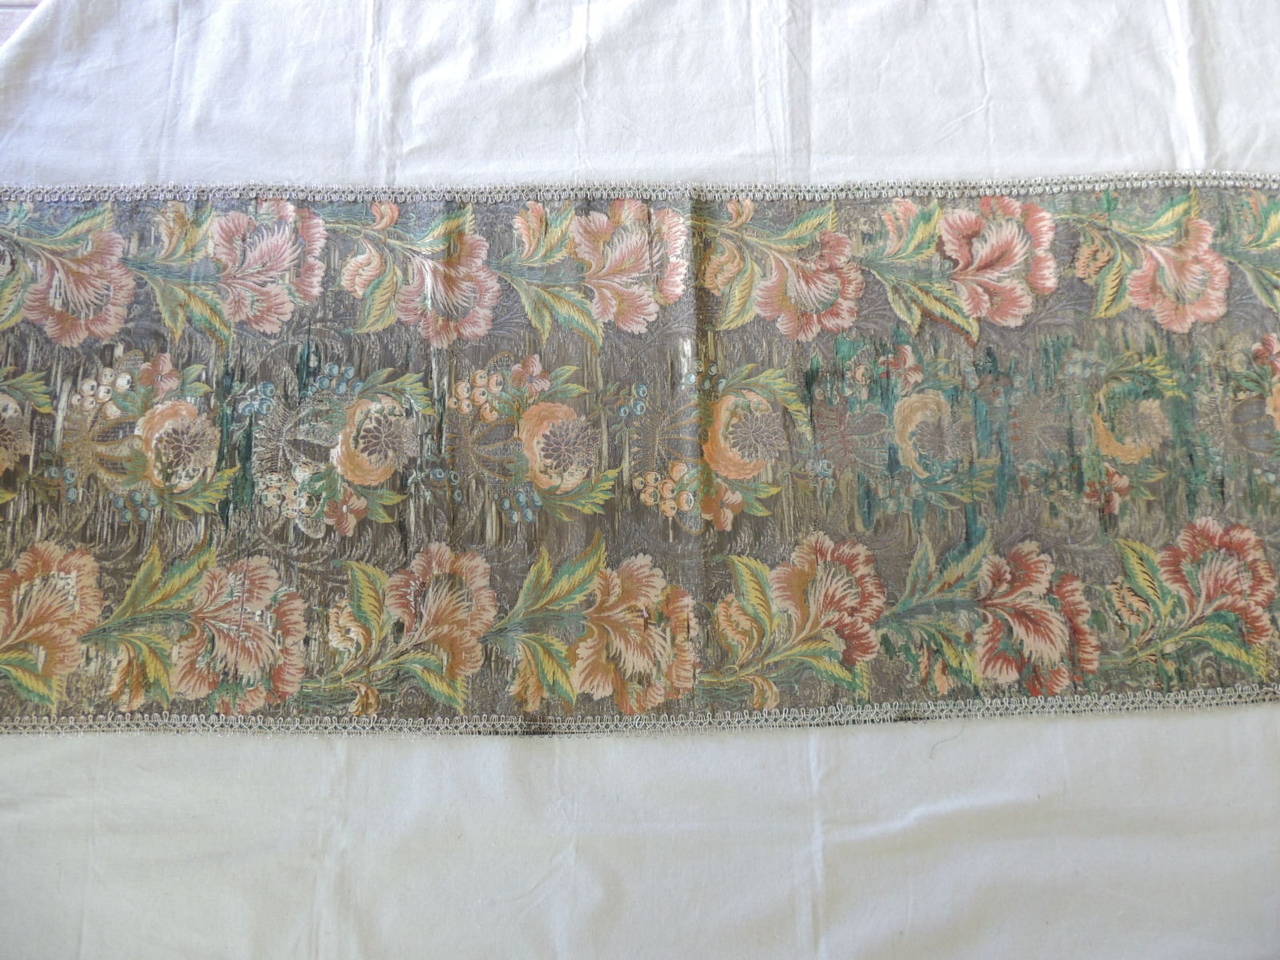 Hand-Crafted 18th Century Green and Orange Woven French Silk Brocade Table Runner